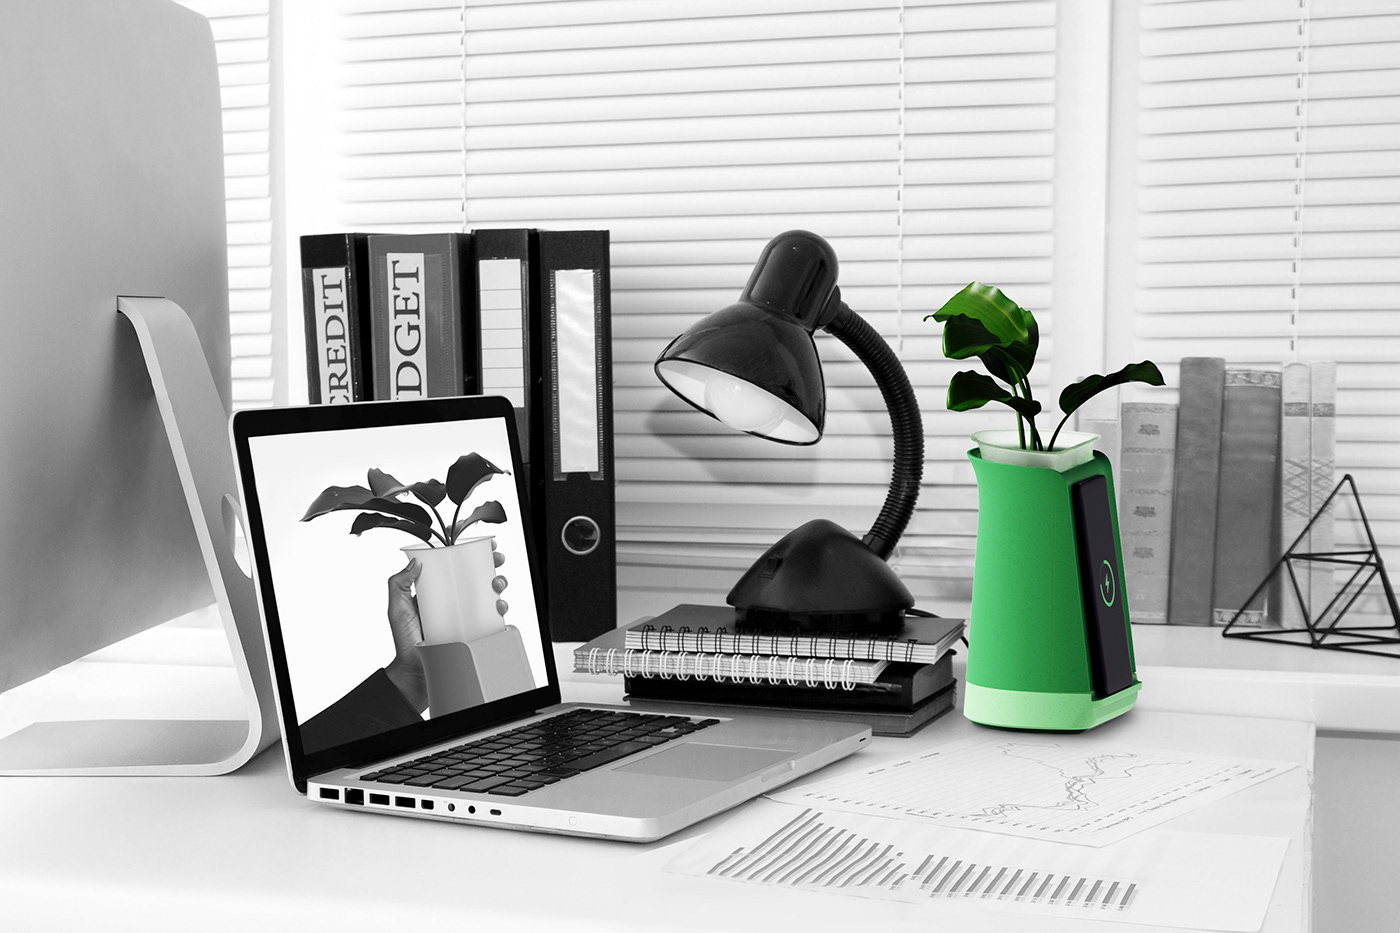 charger color concept industrial design  Office plants portfolio product design  smartphone Wireless Charger